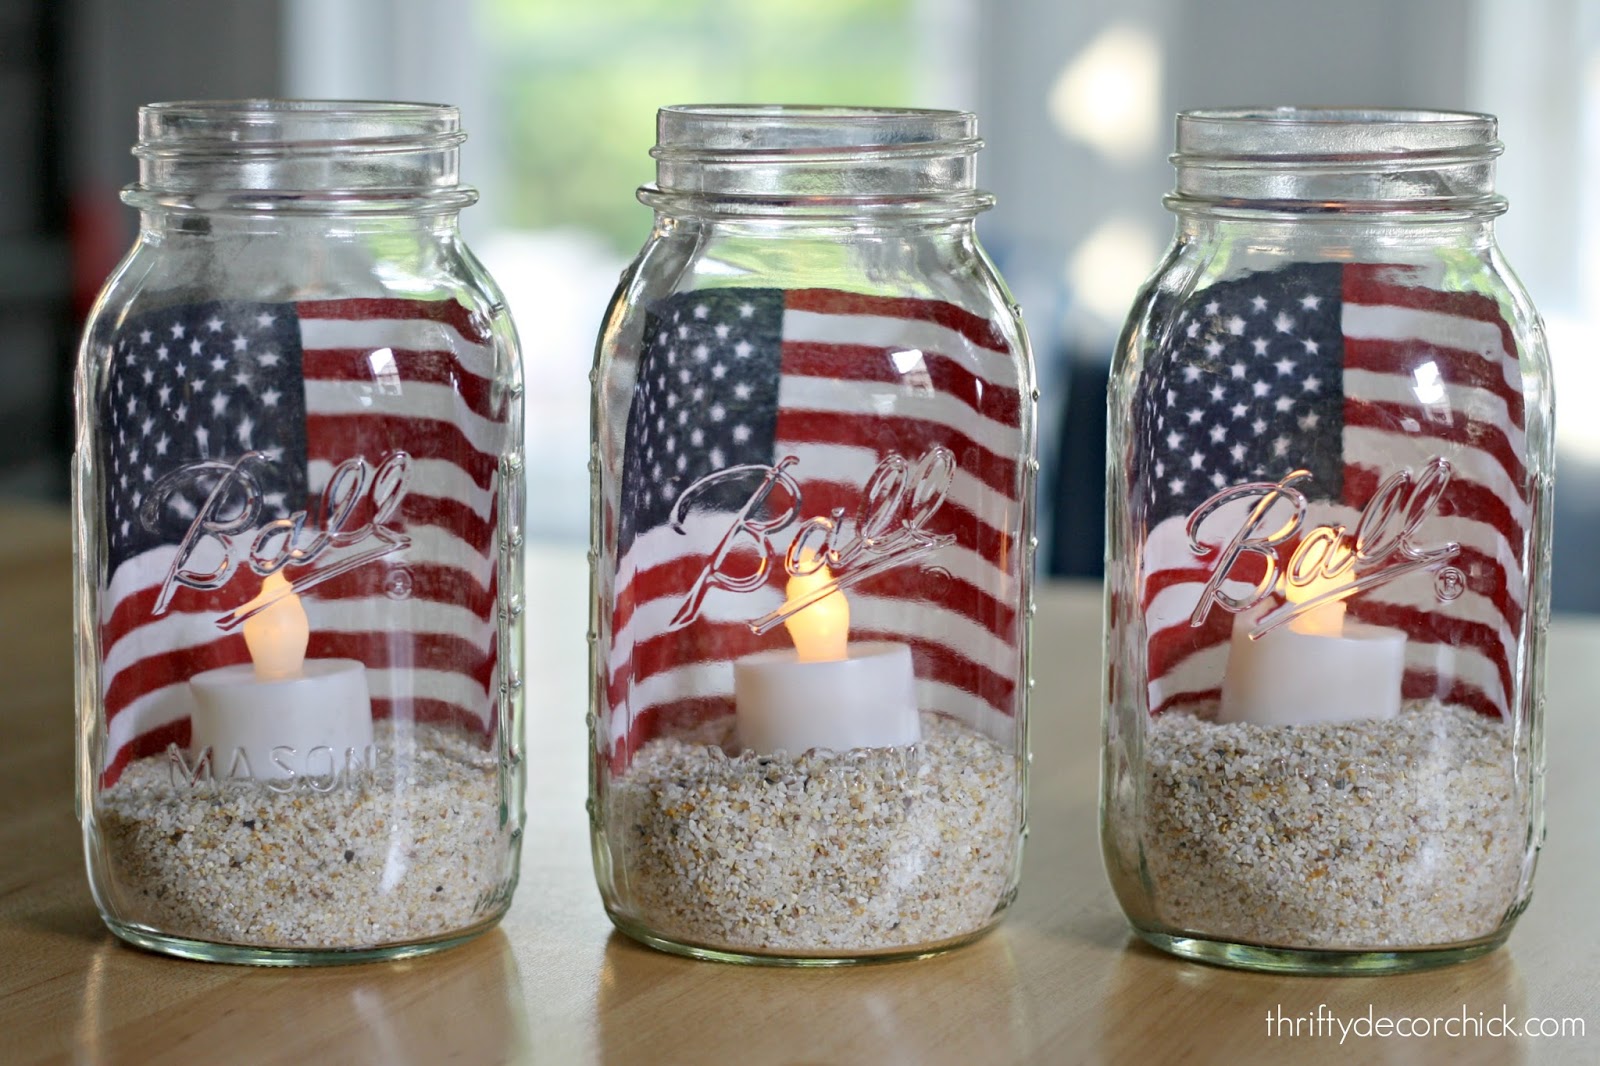 A close up of 3 bottles with small american flags in each